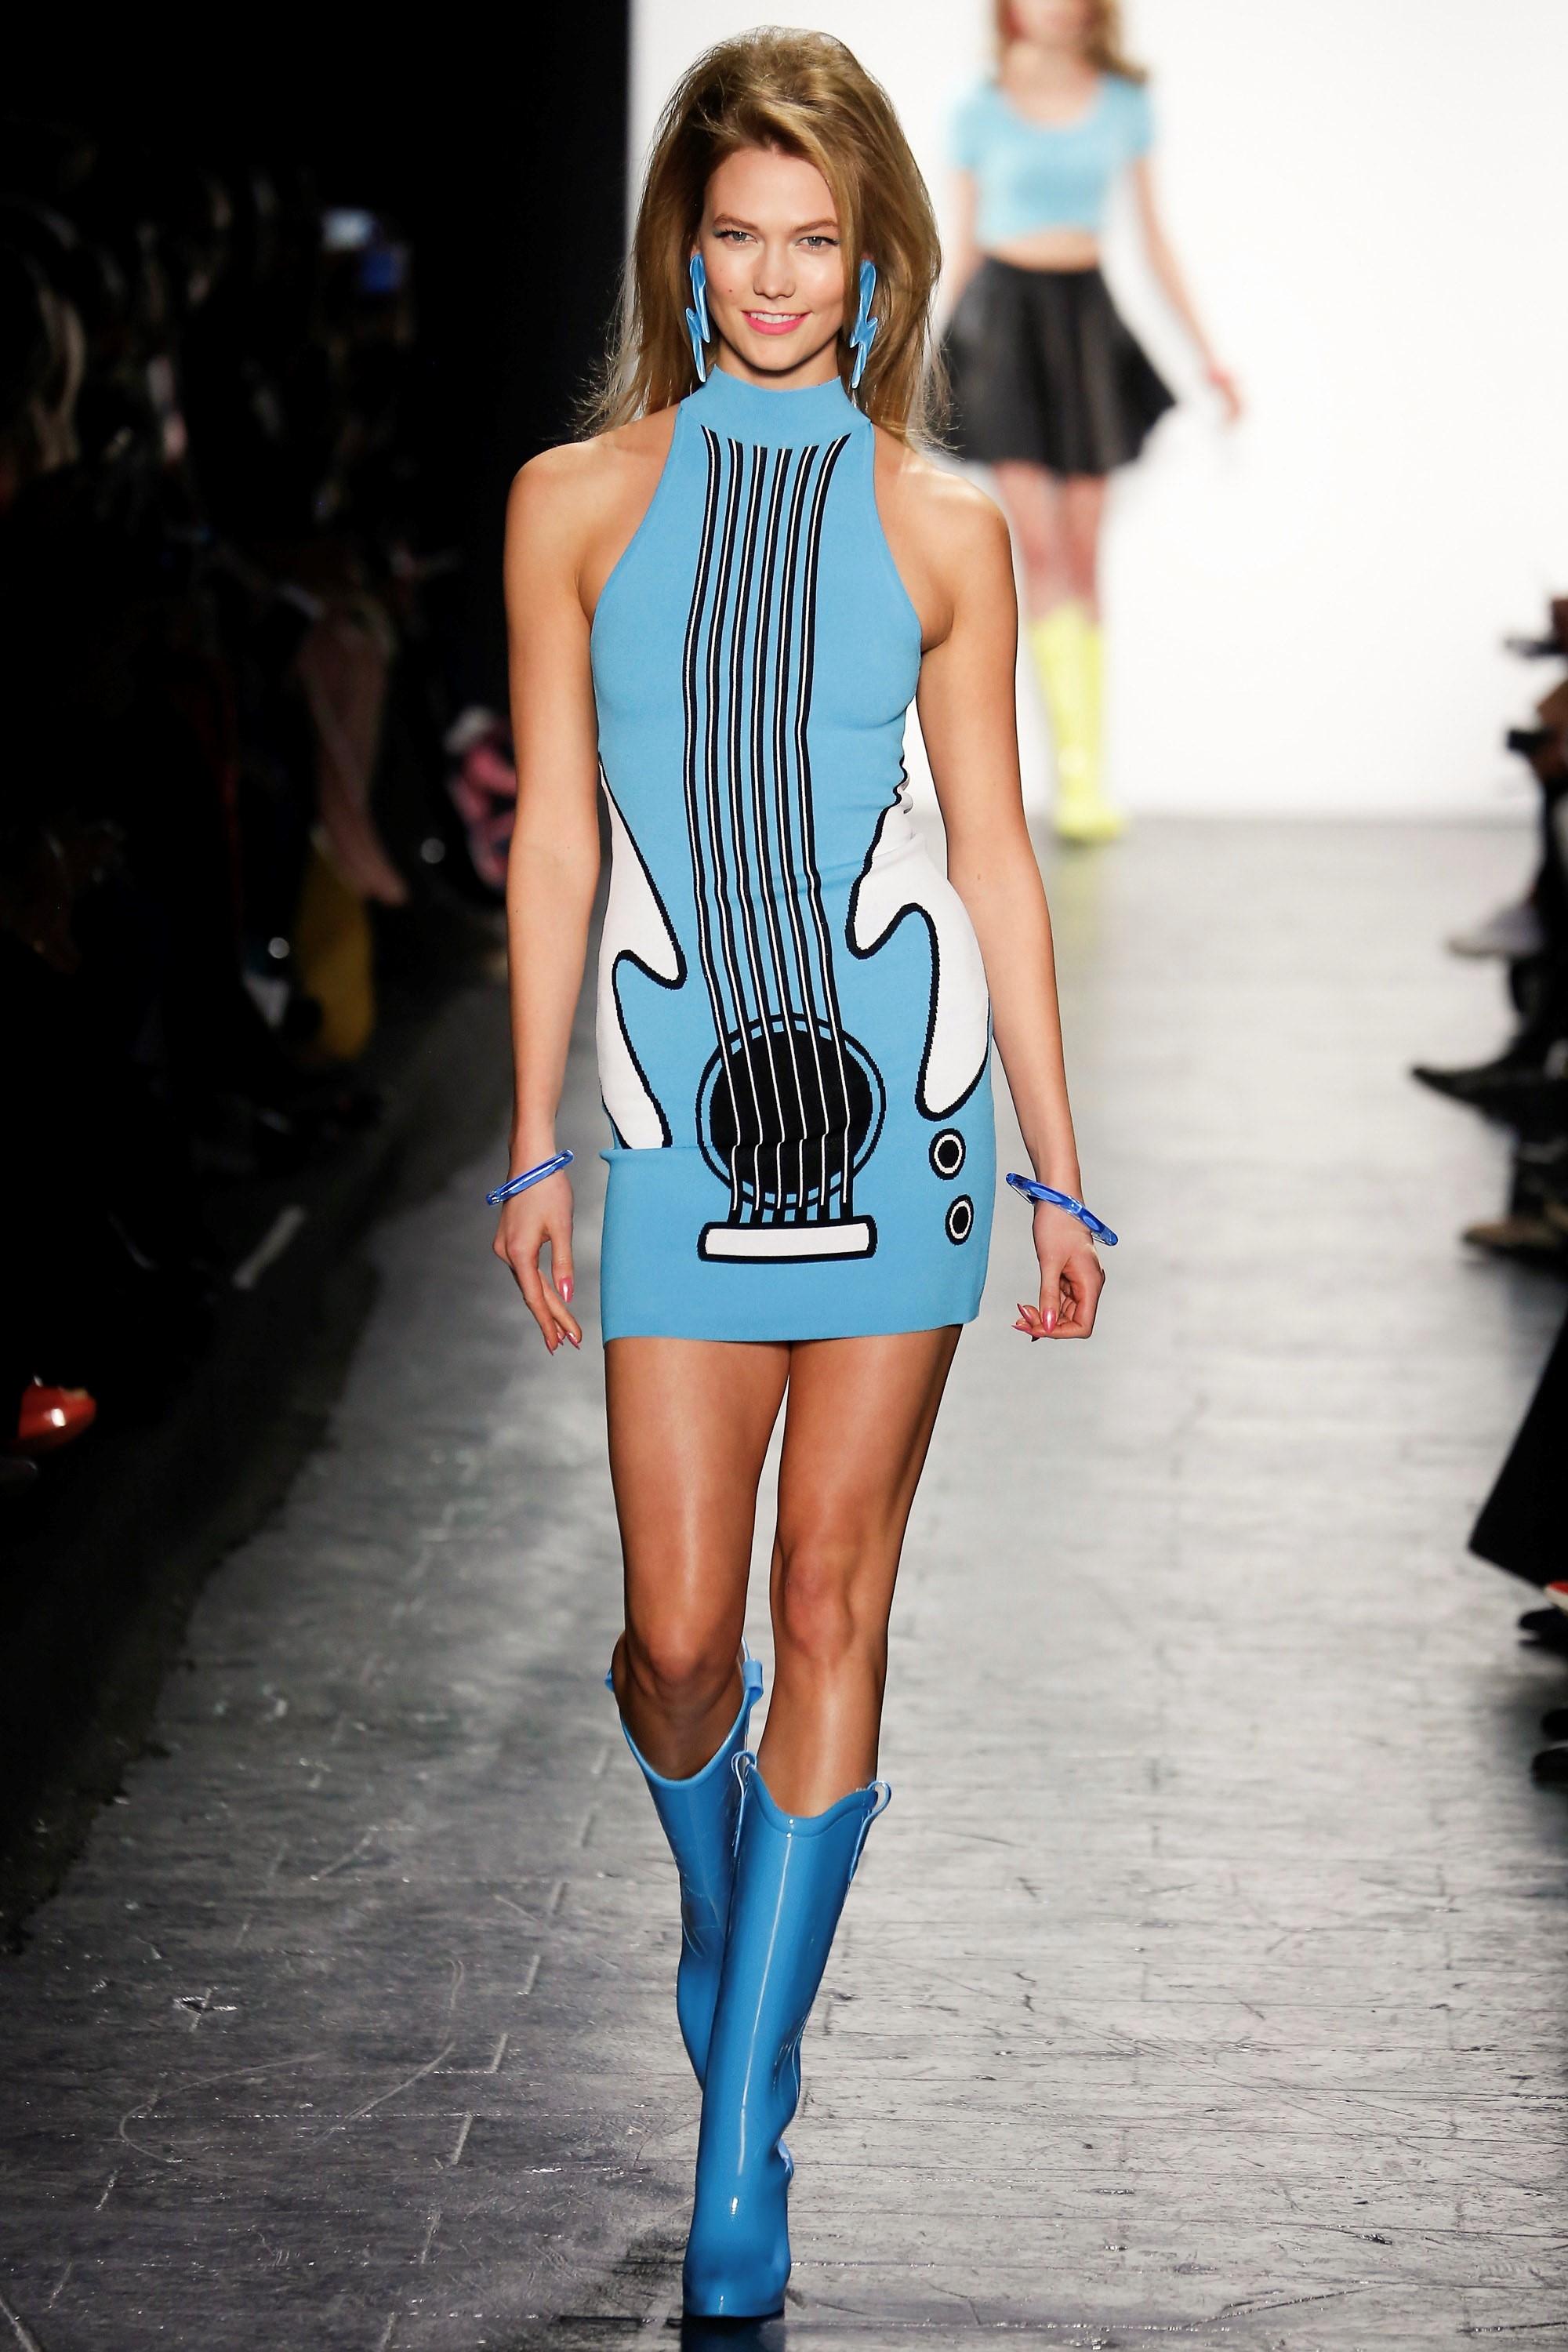 Brand New
Moschino's Jeremy Scott Famous Blue Guitar Dress
Italian Size 38 Bodycon With Plenty of Stretch Available
Runway F/W 2016
Seen on Katy Perry
$990

COMPOSITION
75% Rayon, 25% Polyamide
Made in Italy